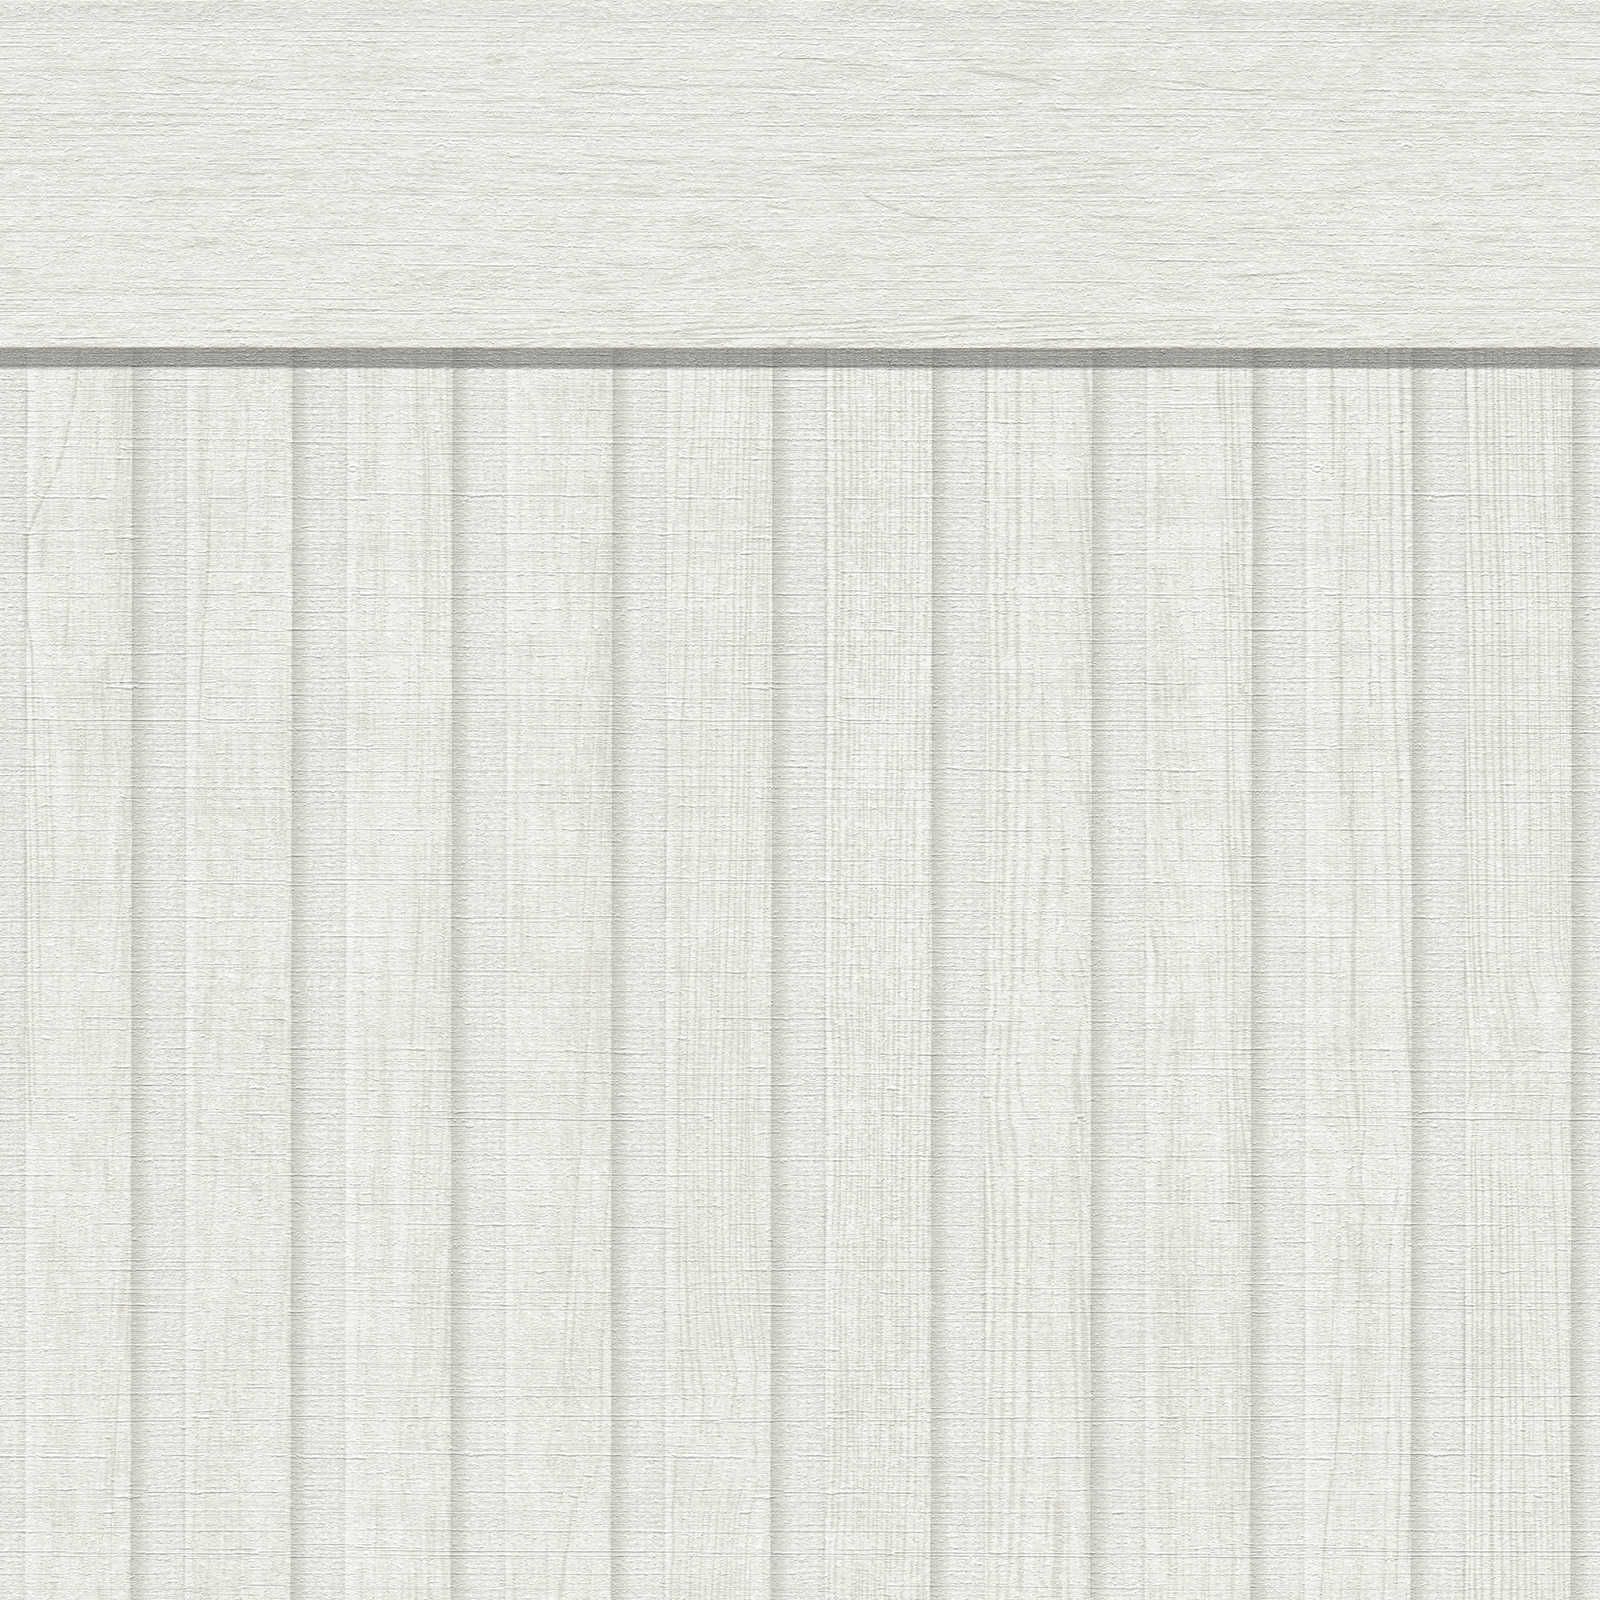         Non-woven wall panel with realistic acoustic panel pattern made of wood - white, grey
    